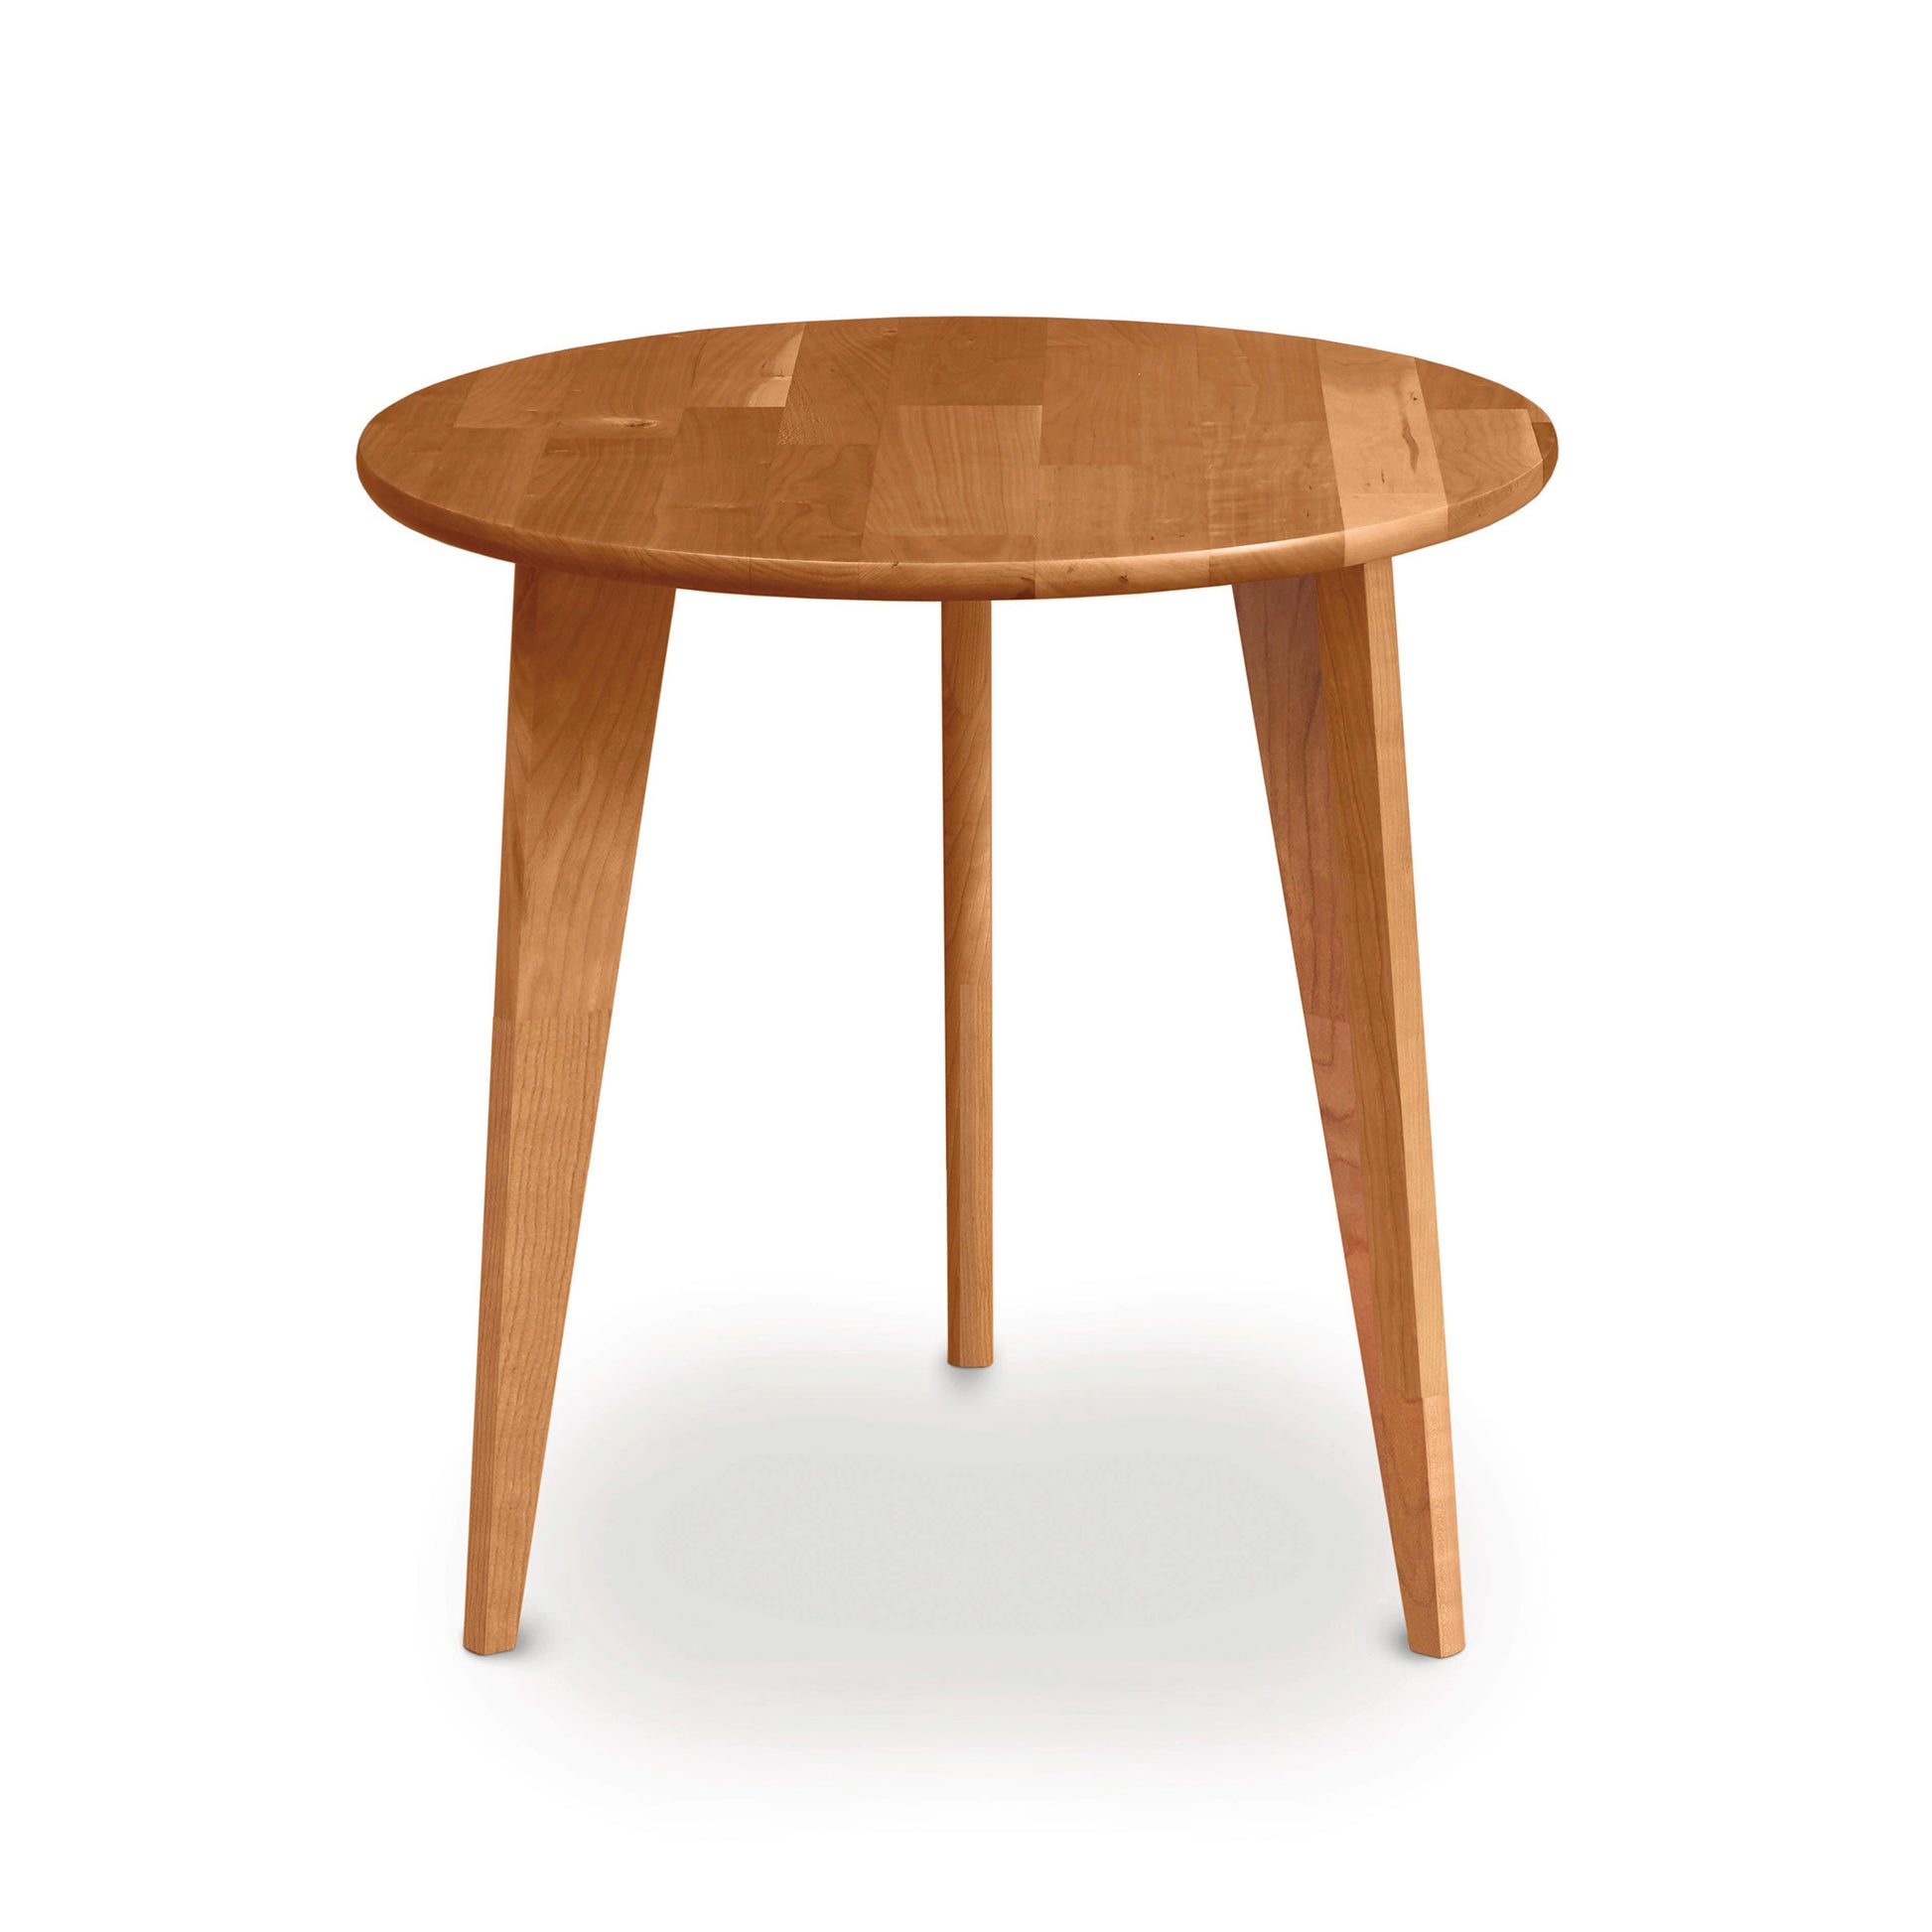 A mid-century modern Essentials Round End Table with Wood Legs from Copeland Furniture, isolated on a white background.